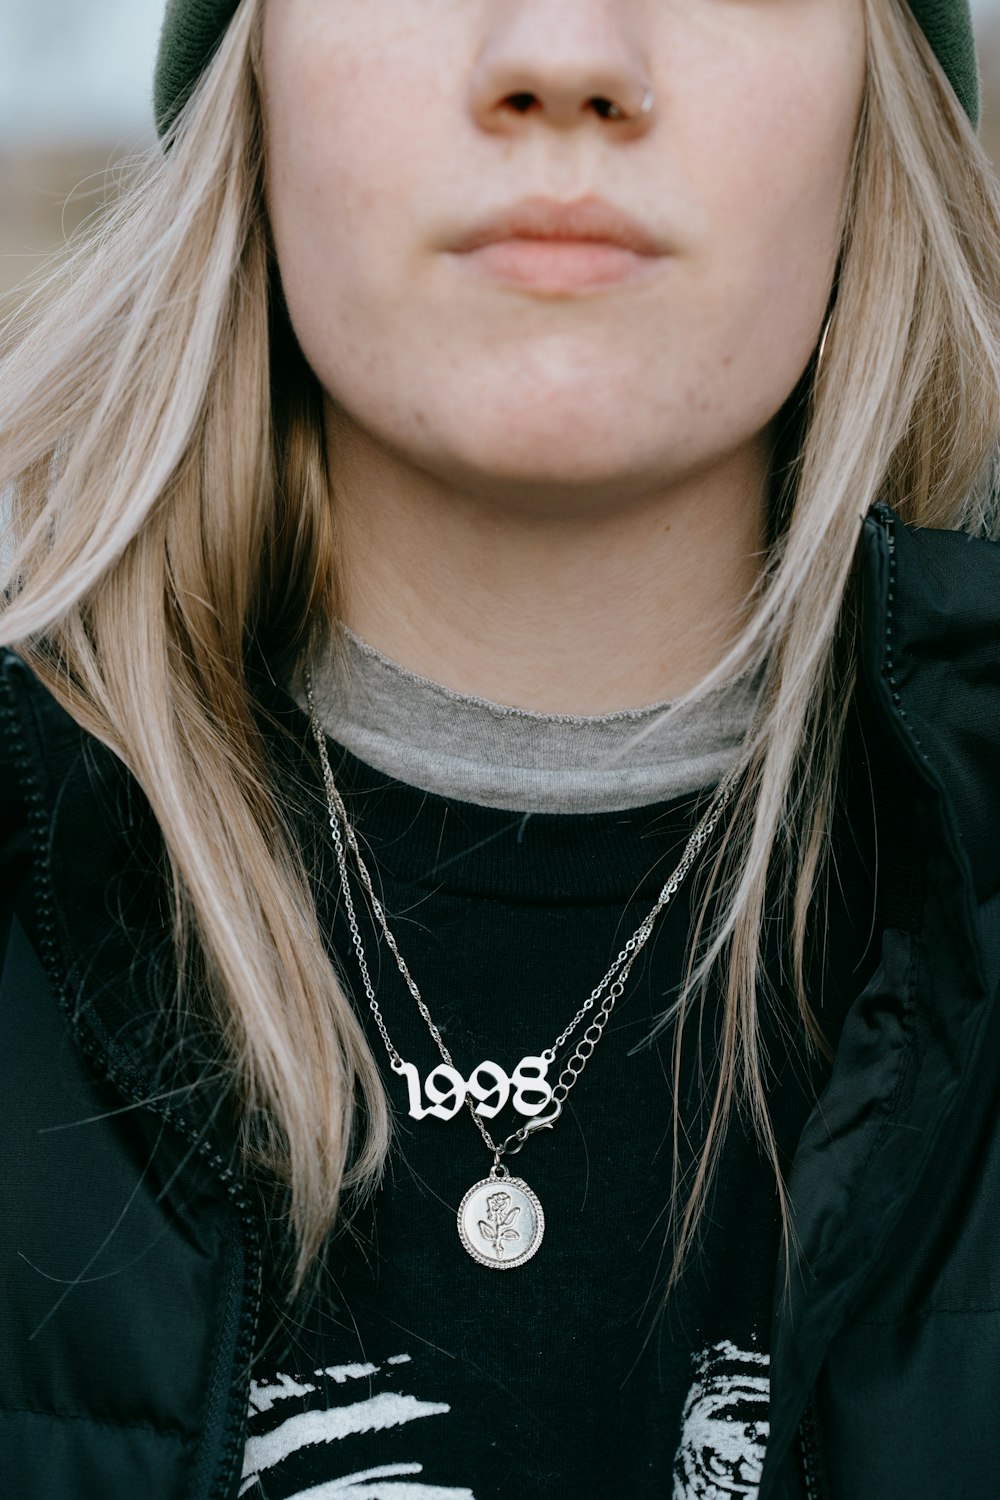 woman in black shirt wearing silver necklace